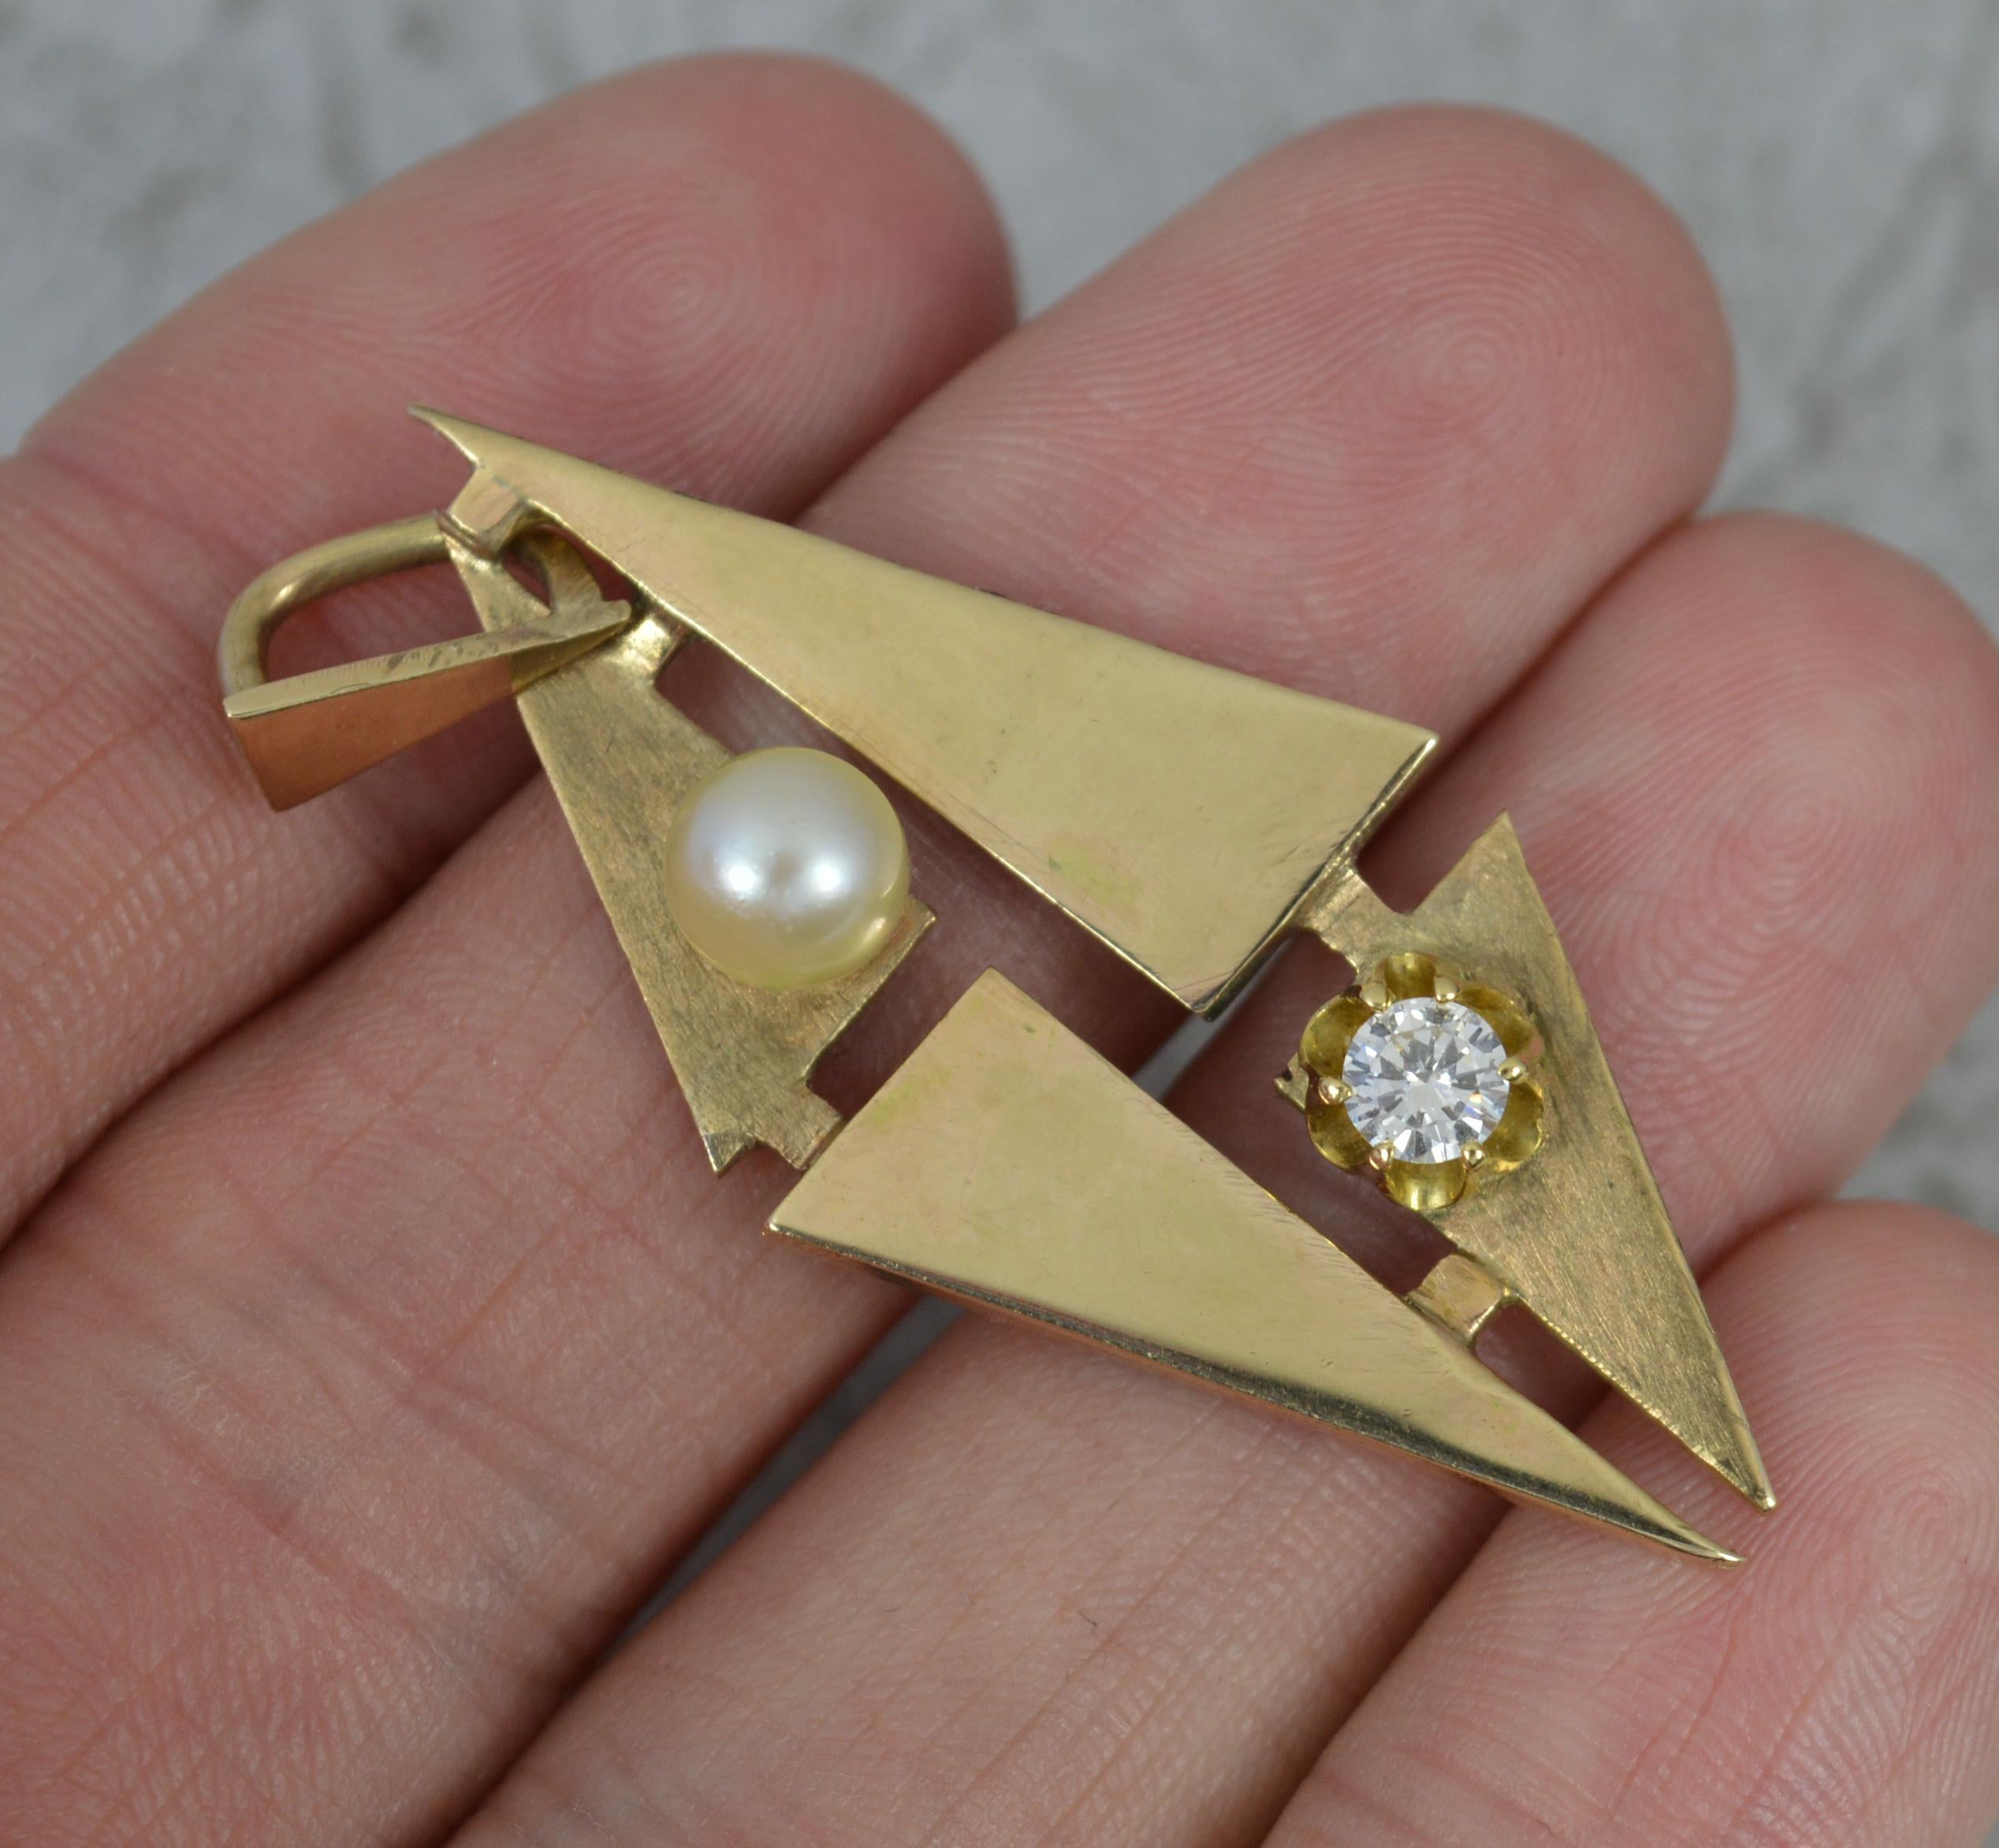 A stunning retro pendant.
Solid 9 carat yellow gold example.
A highly unusual triangular abstract shape. The plain panels of smoot polished finish with a brushed finish to the sections set with a single pearl and diamond. 0.25ct stone, vs clarity,